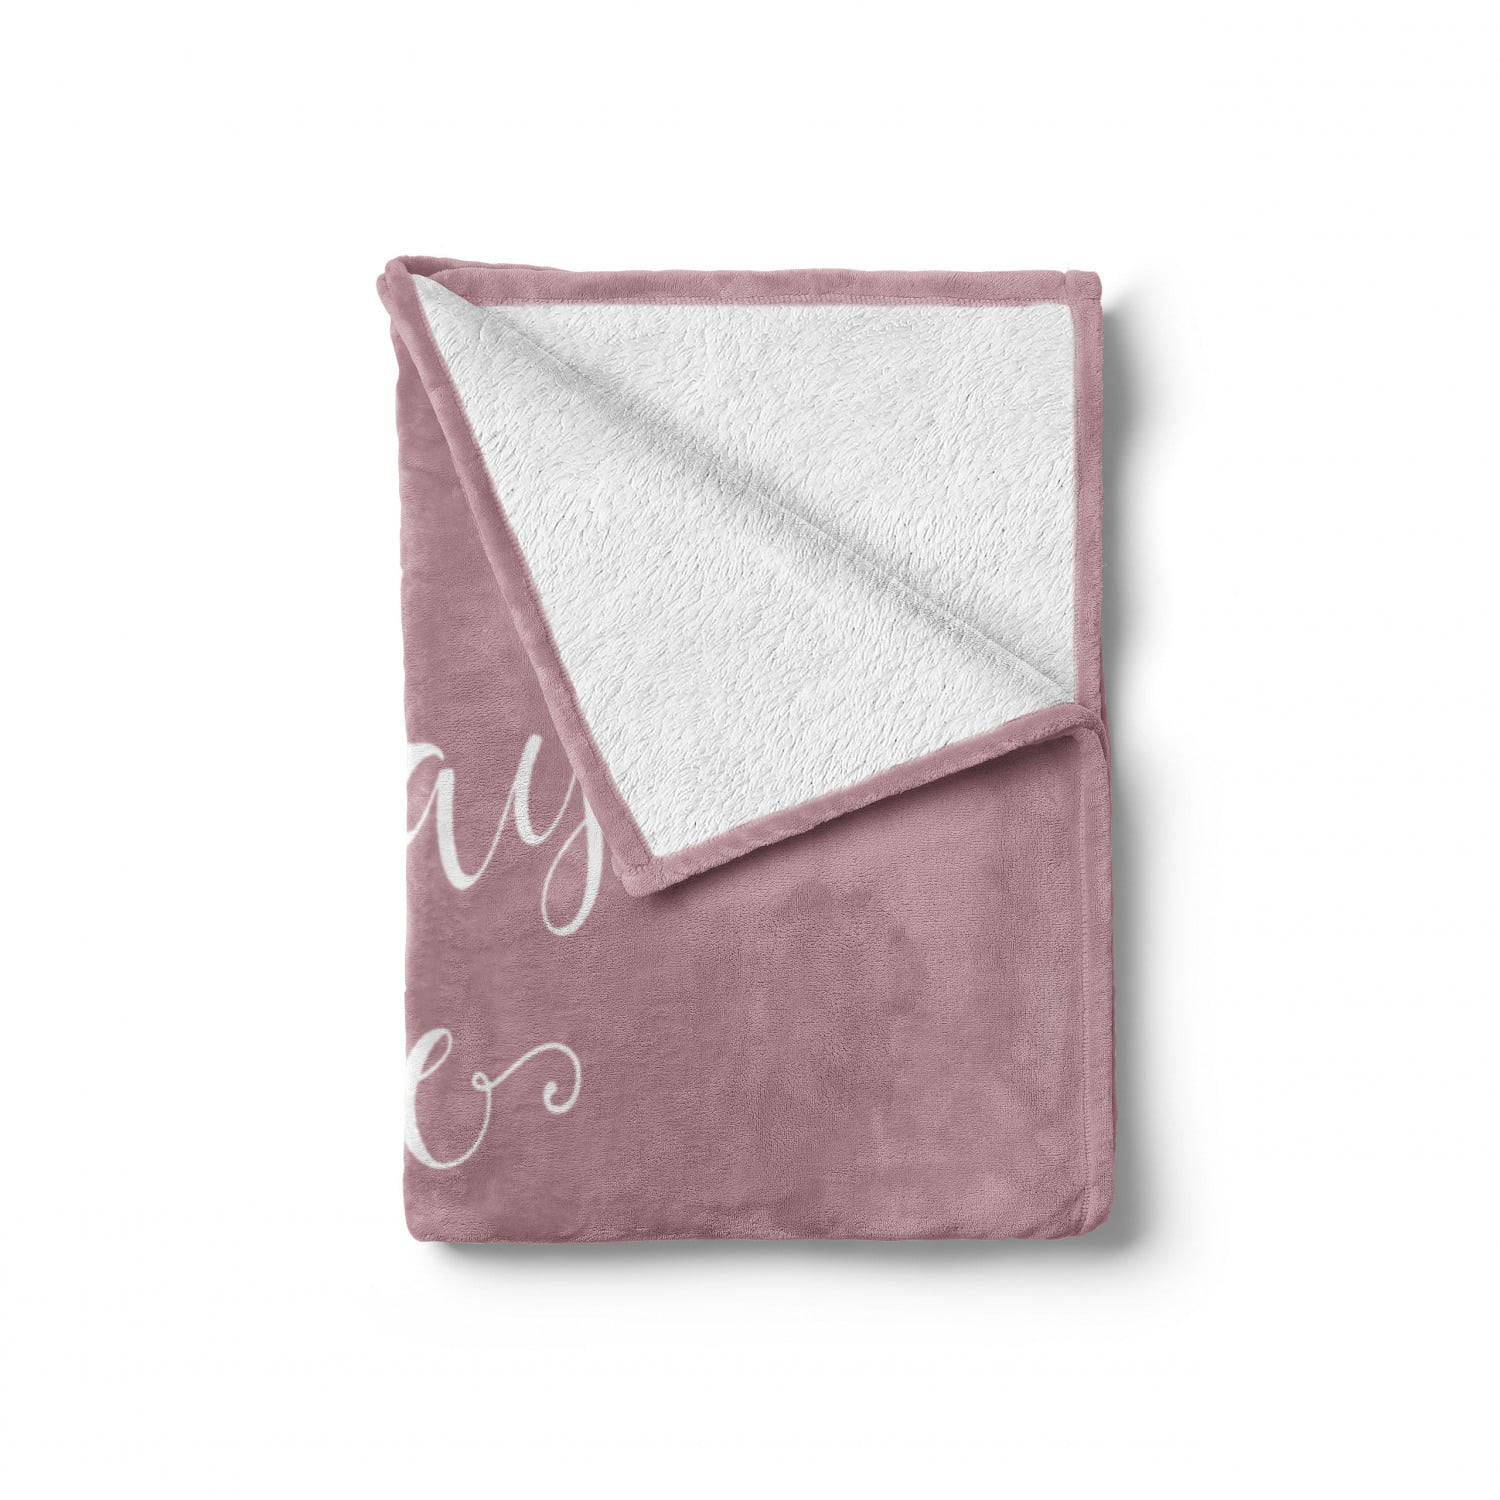 Love Soft Flannel Fleece Throw Blanket, Romantic Theme Flowers and Leaves  Motifs Lettering Phrase Always See the Beauty, Cozy Plush for Indoor and 